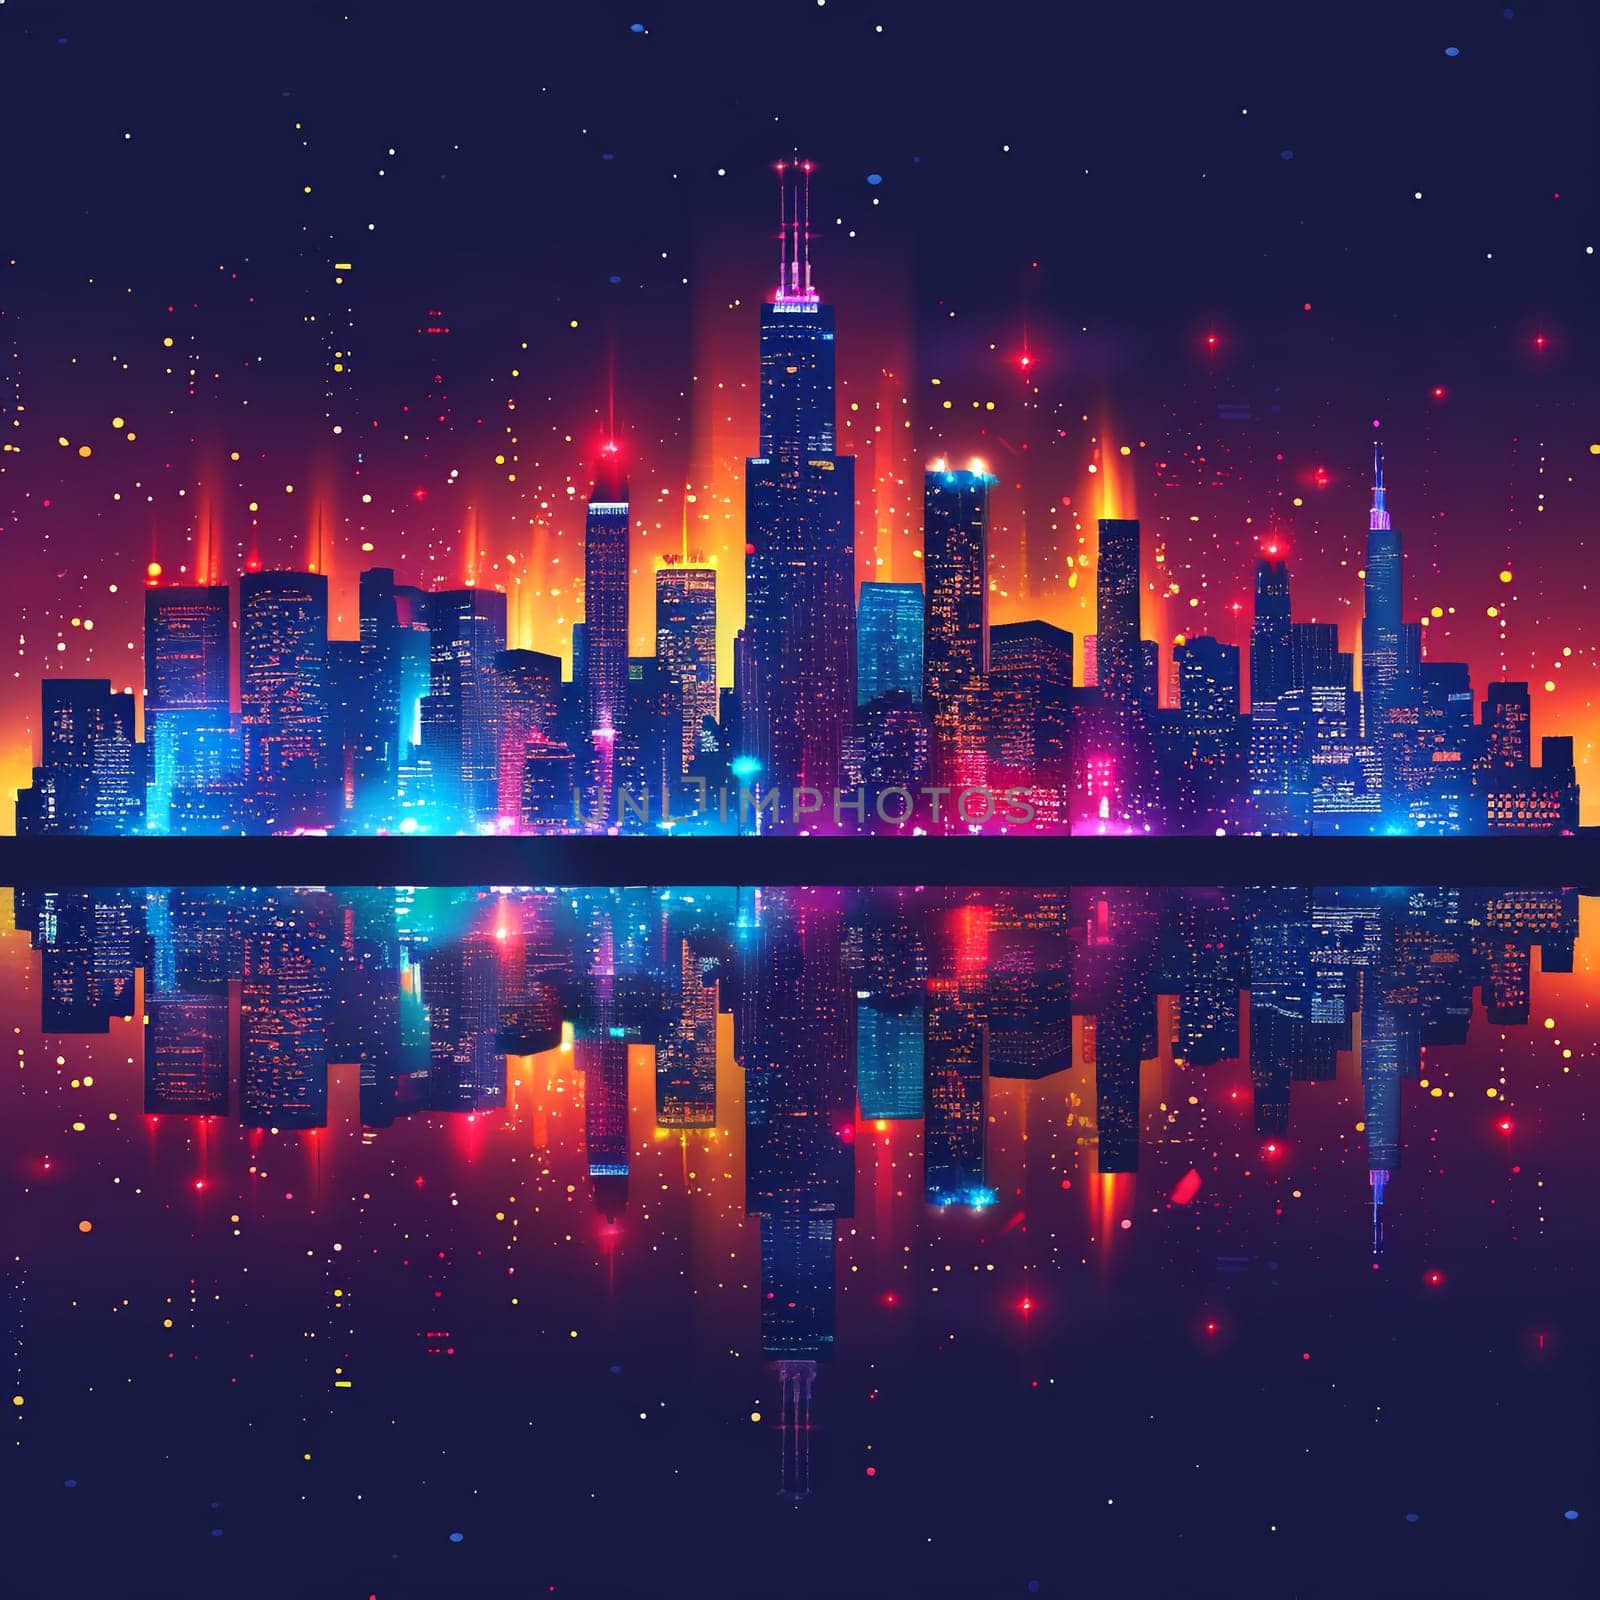 Illuminated city skyline at night, suitable for urban and dynamic design projects.